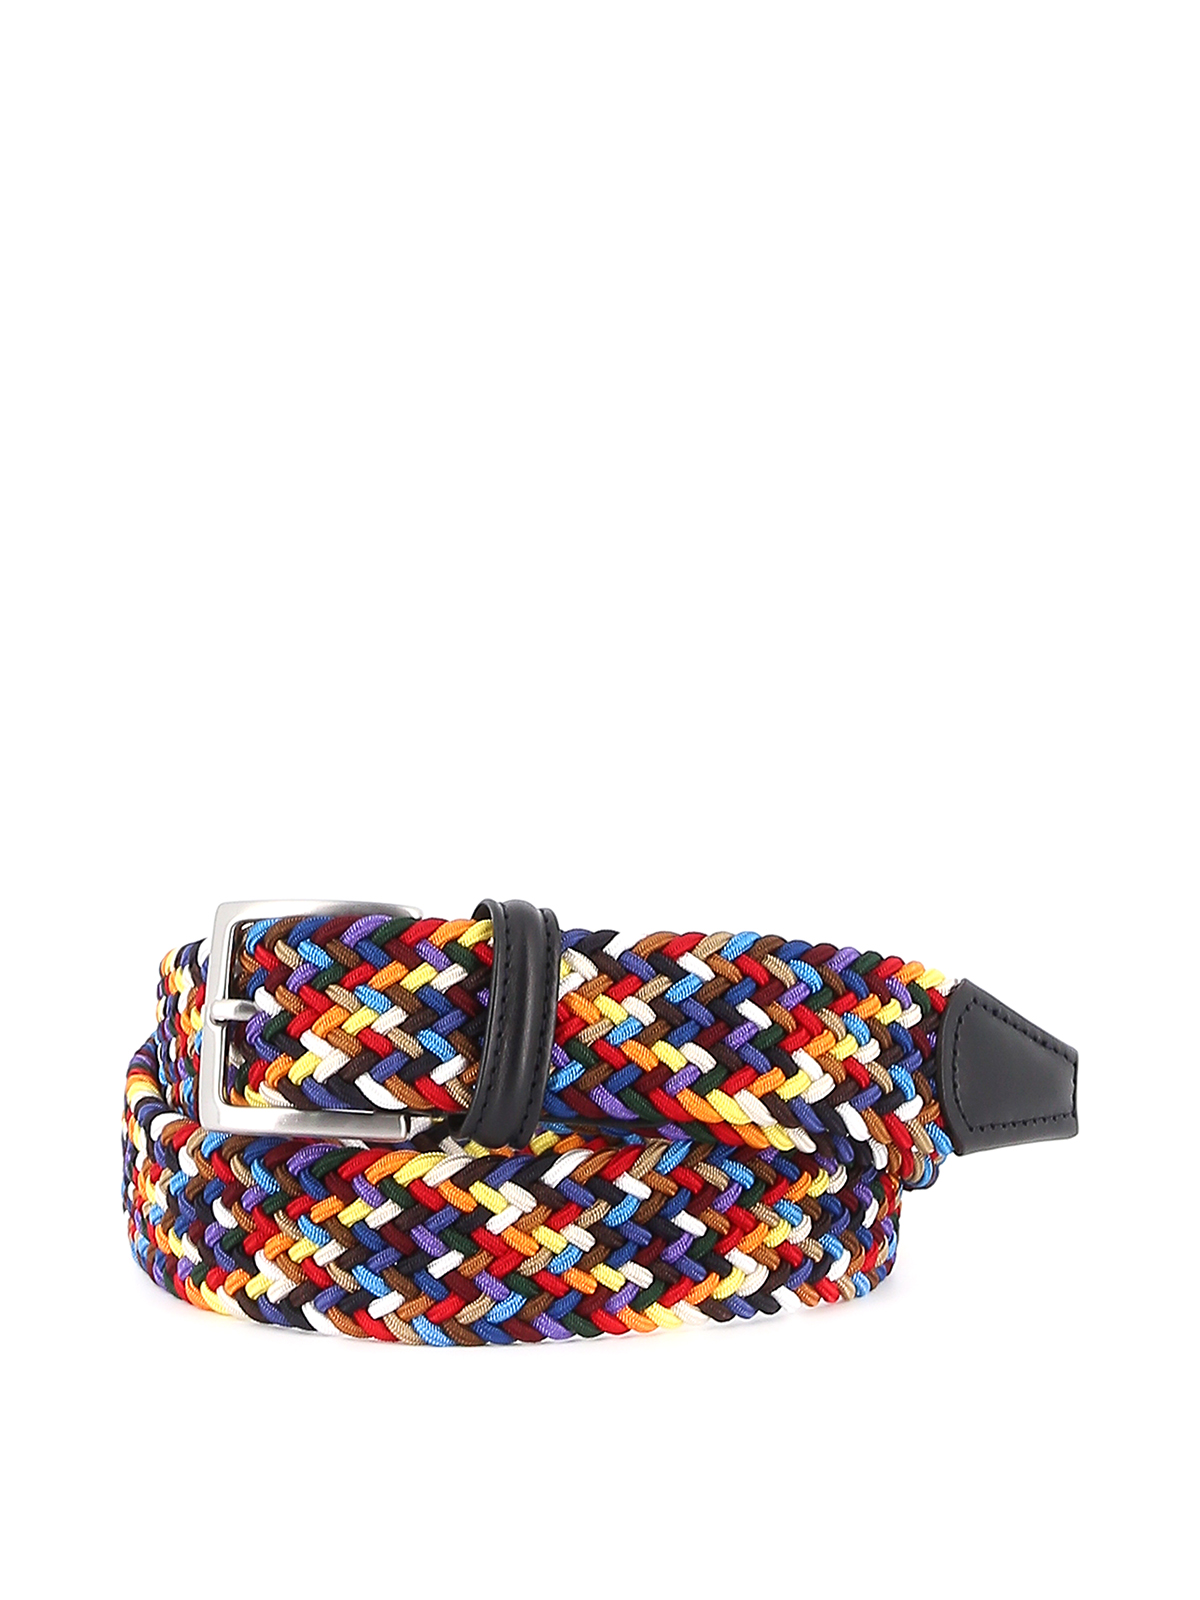 ANDERSON'S HARLEQUIN VIBE STRETCH WOVEN BELT